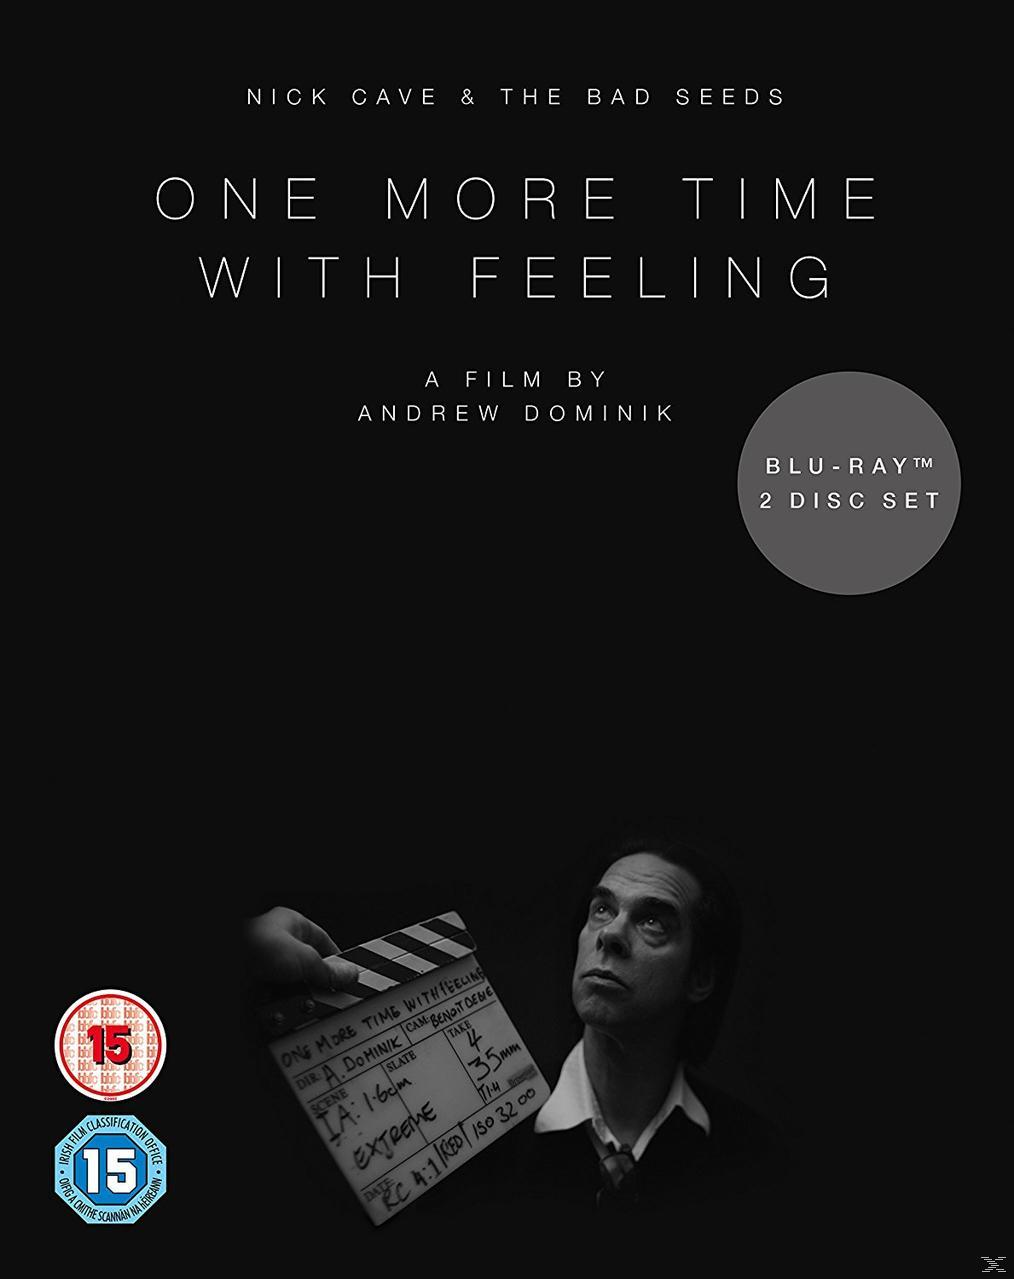 One - The & With (2x - Time Seeds Cave Nick More Blu-Ray) (Blu-ray) Feeling Bad